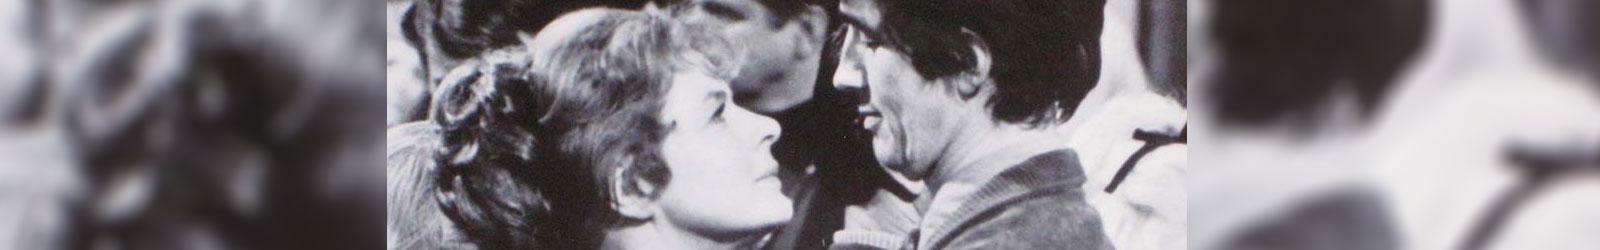 A cropped view of Ingrid Bergman and Rick Lenz in Cactus Flower.